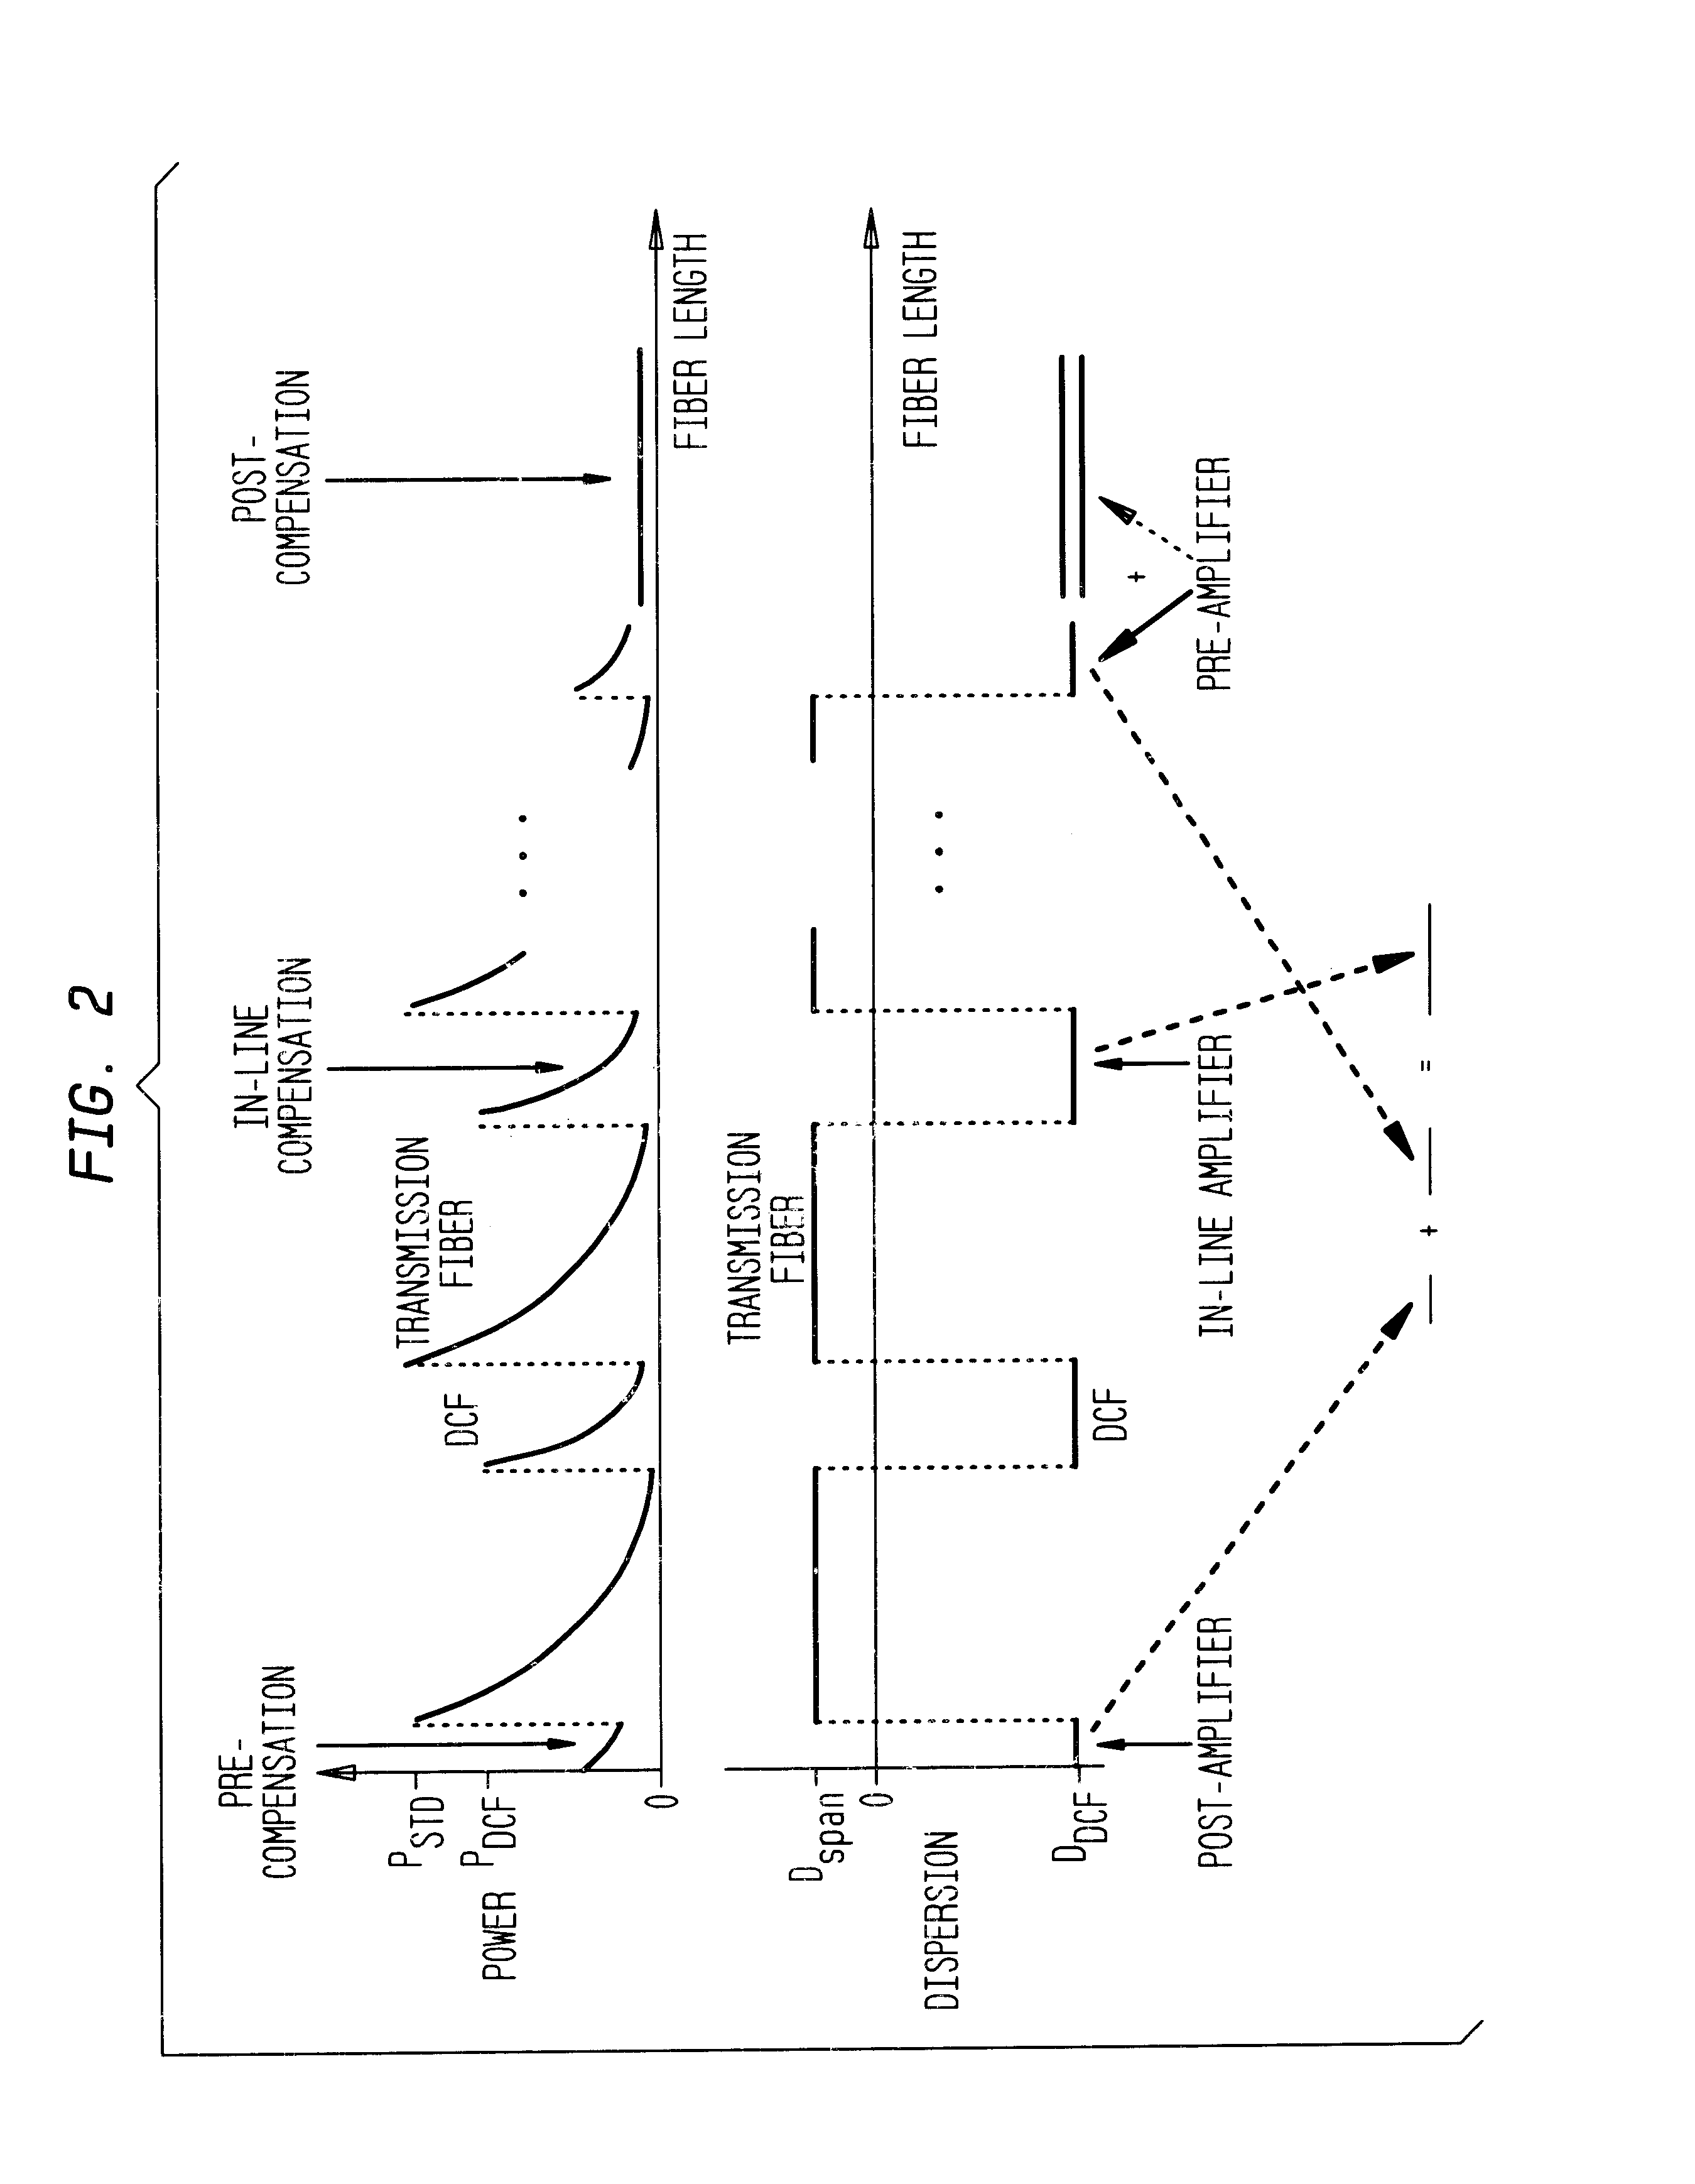 Modulation format with low sensitivity to fiber nonlinearity